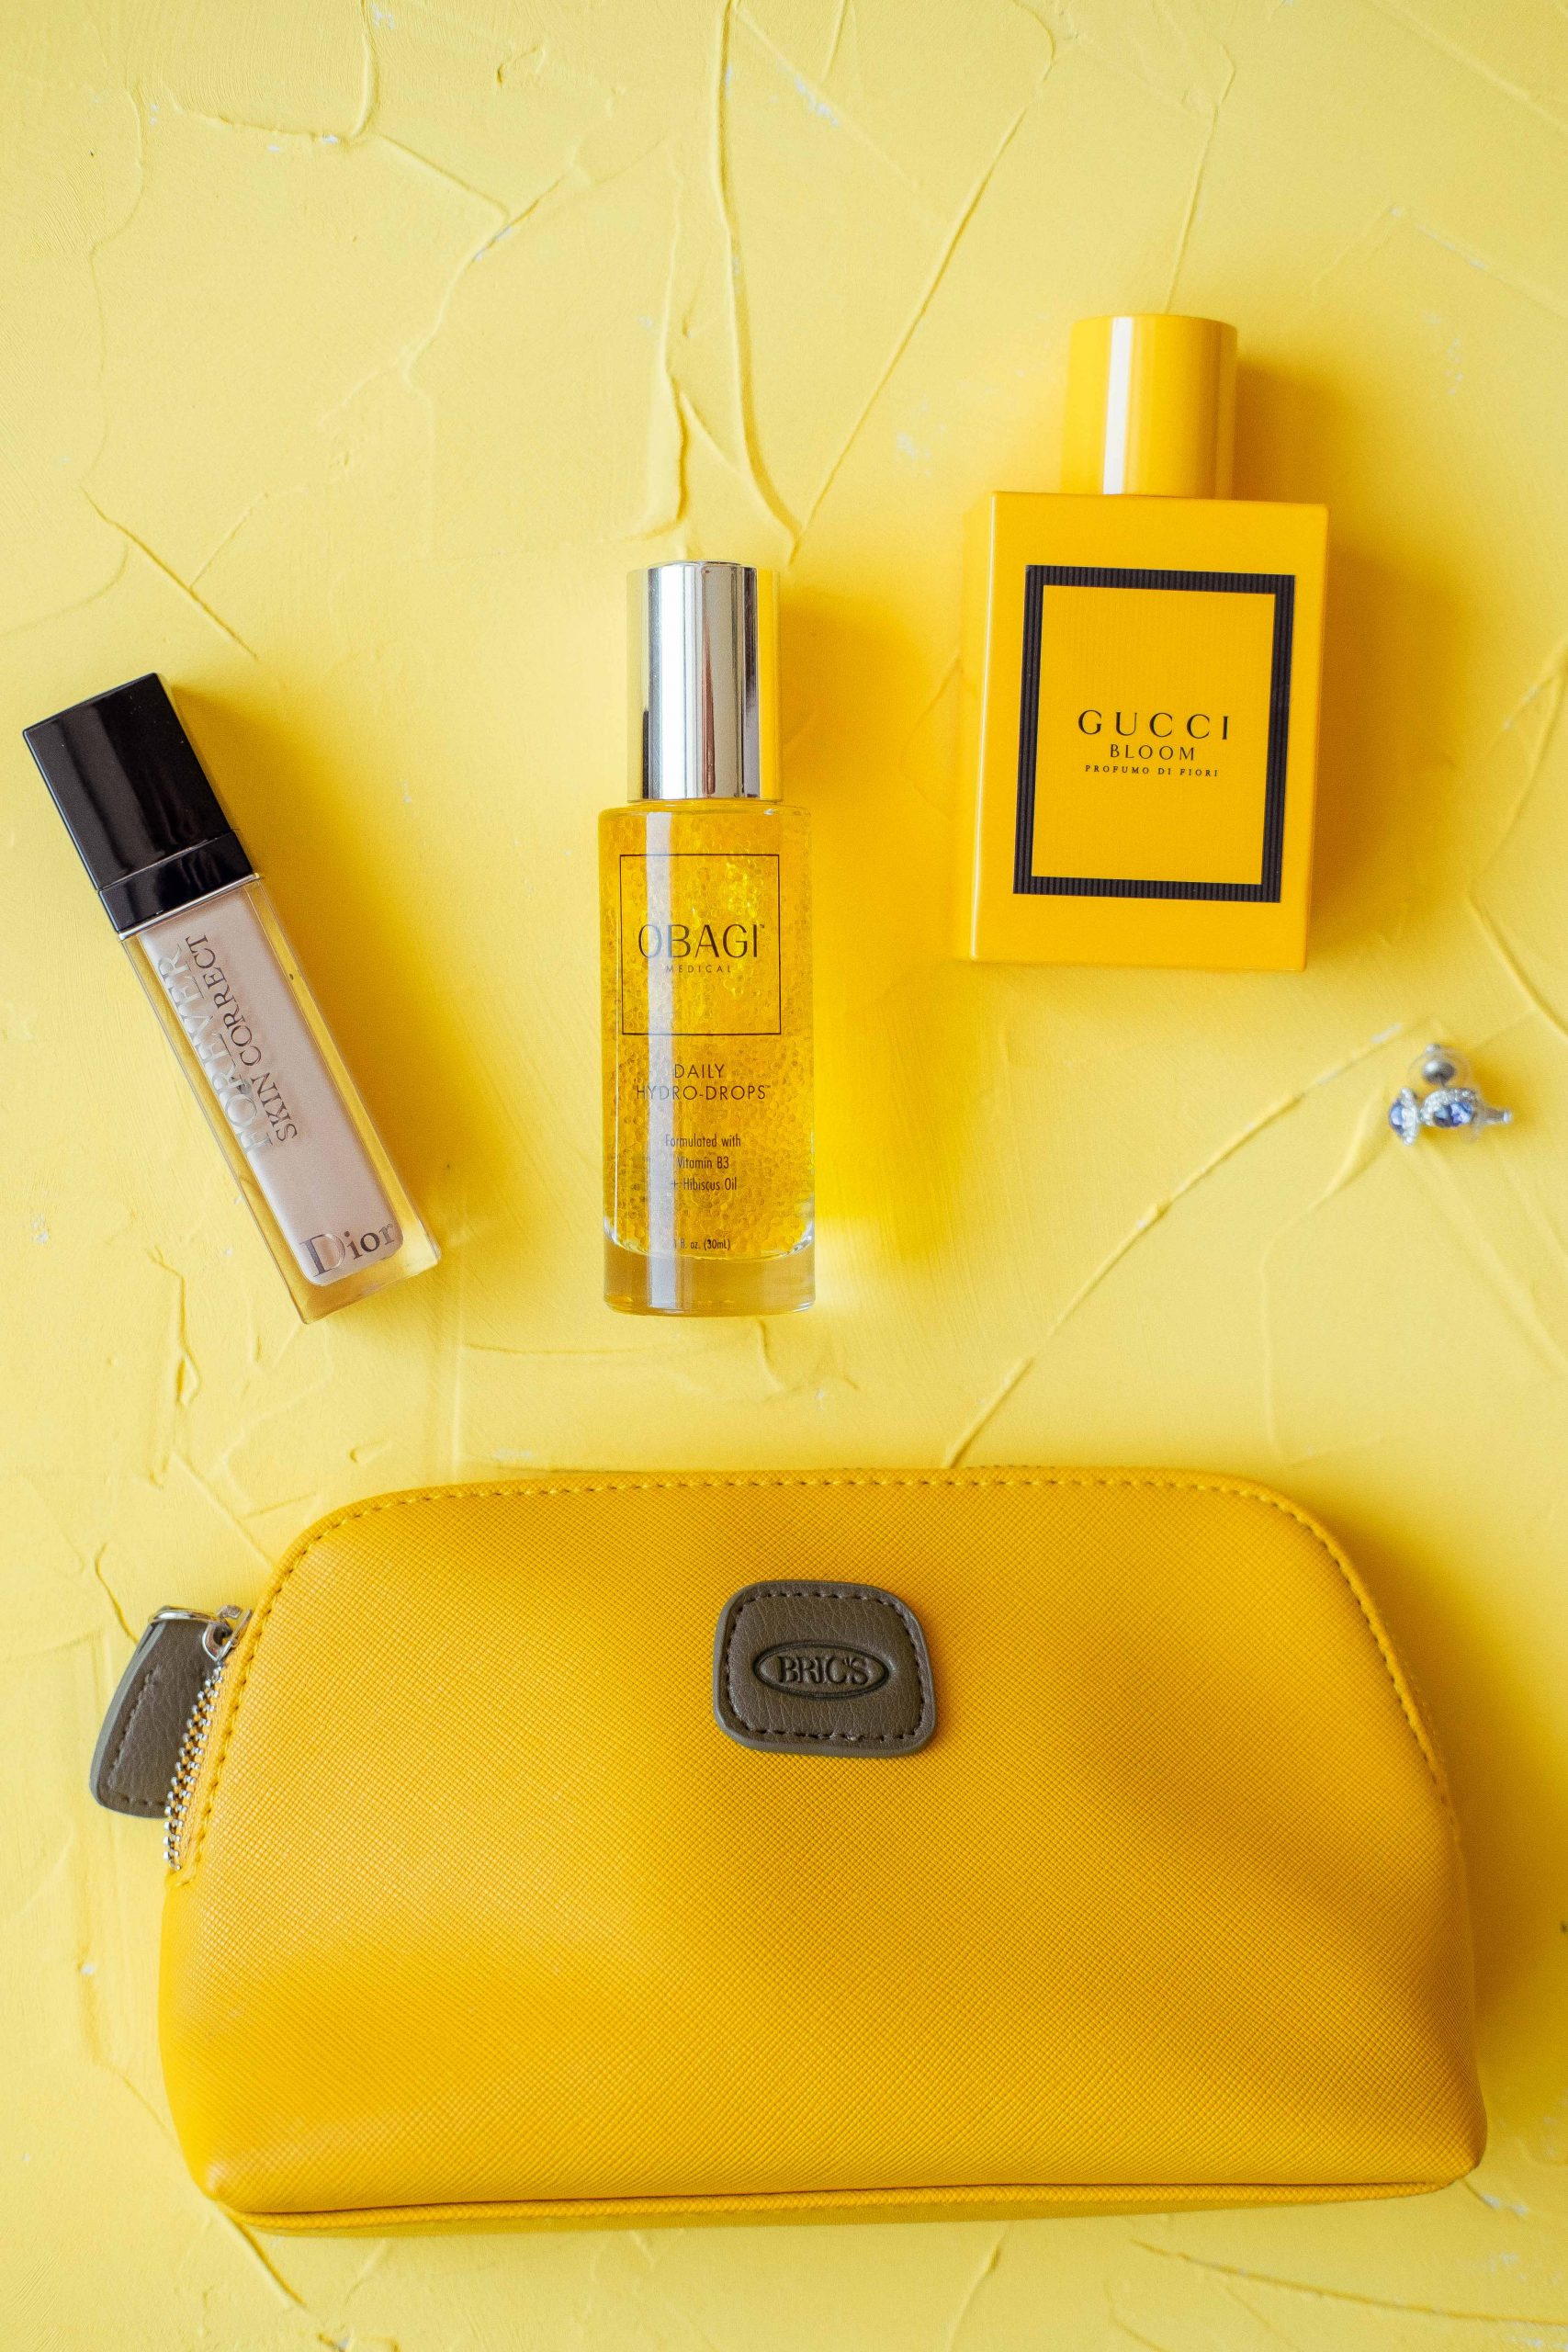 skin care products and cosmetics in our original yellow bag